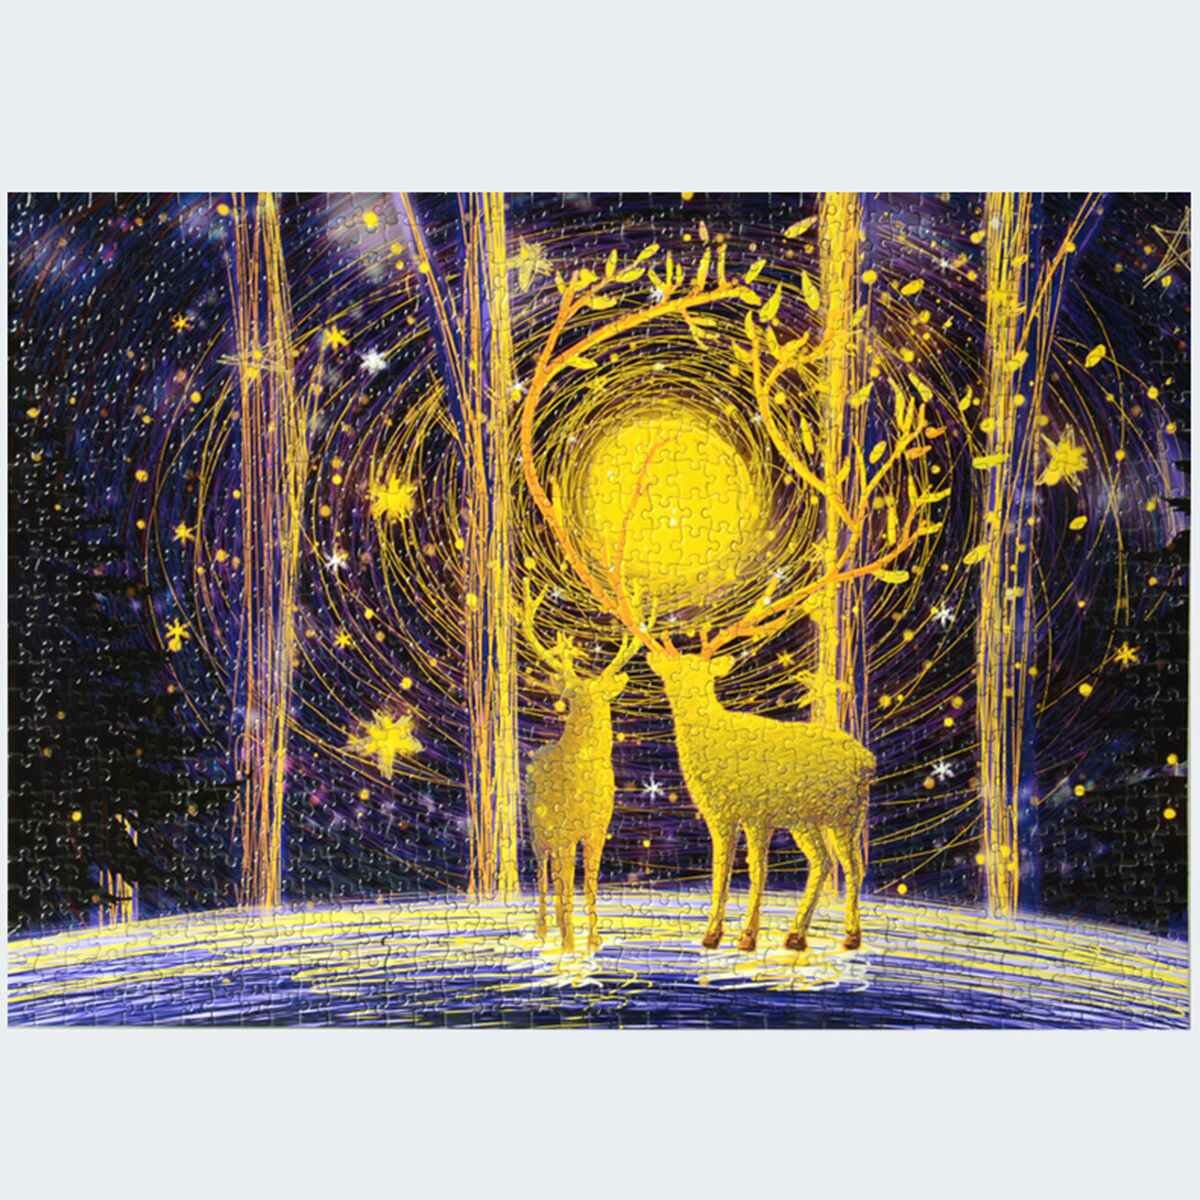 1000 Pieces Deer in the Forest DIY Assembly Jigsaw Puzzles Landscape Picture Educational Games Toy for Adults Children P